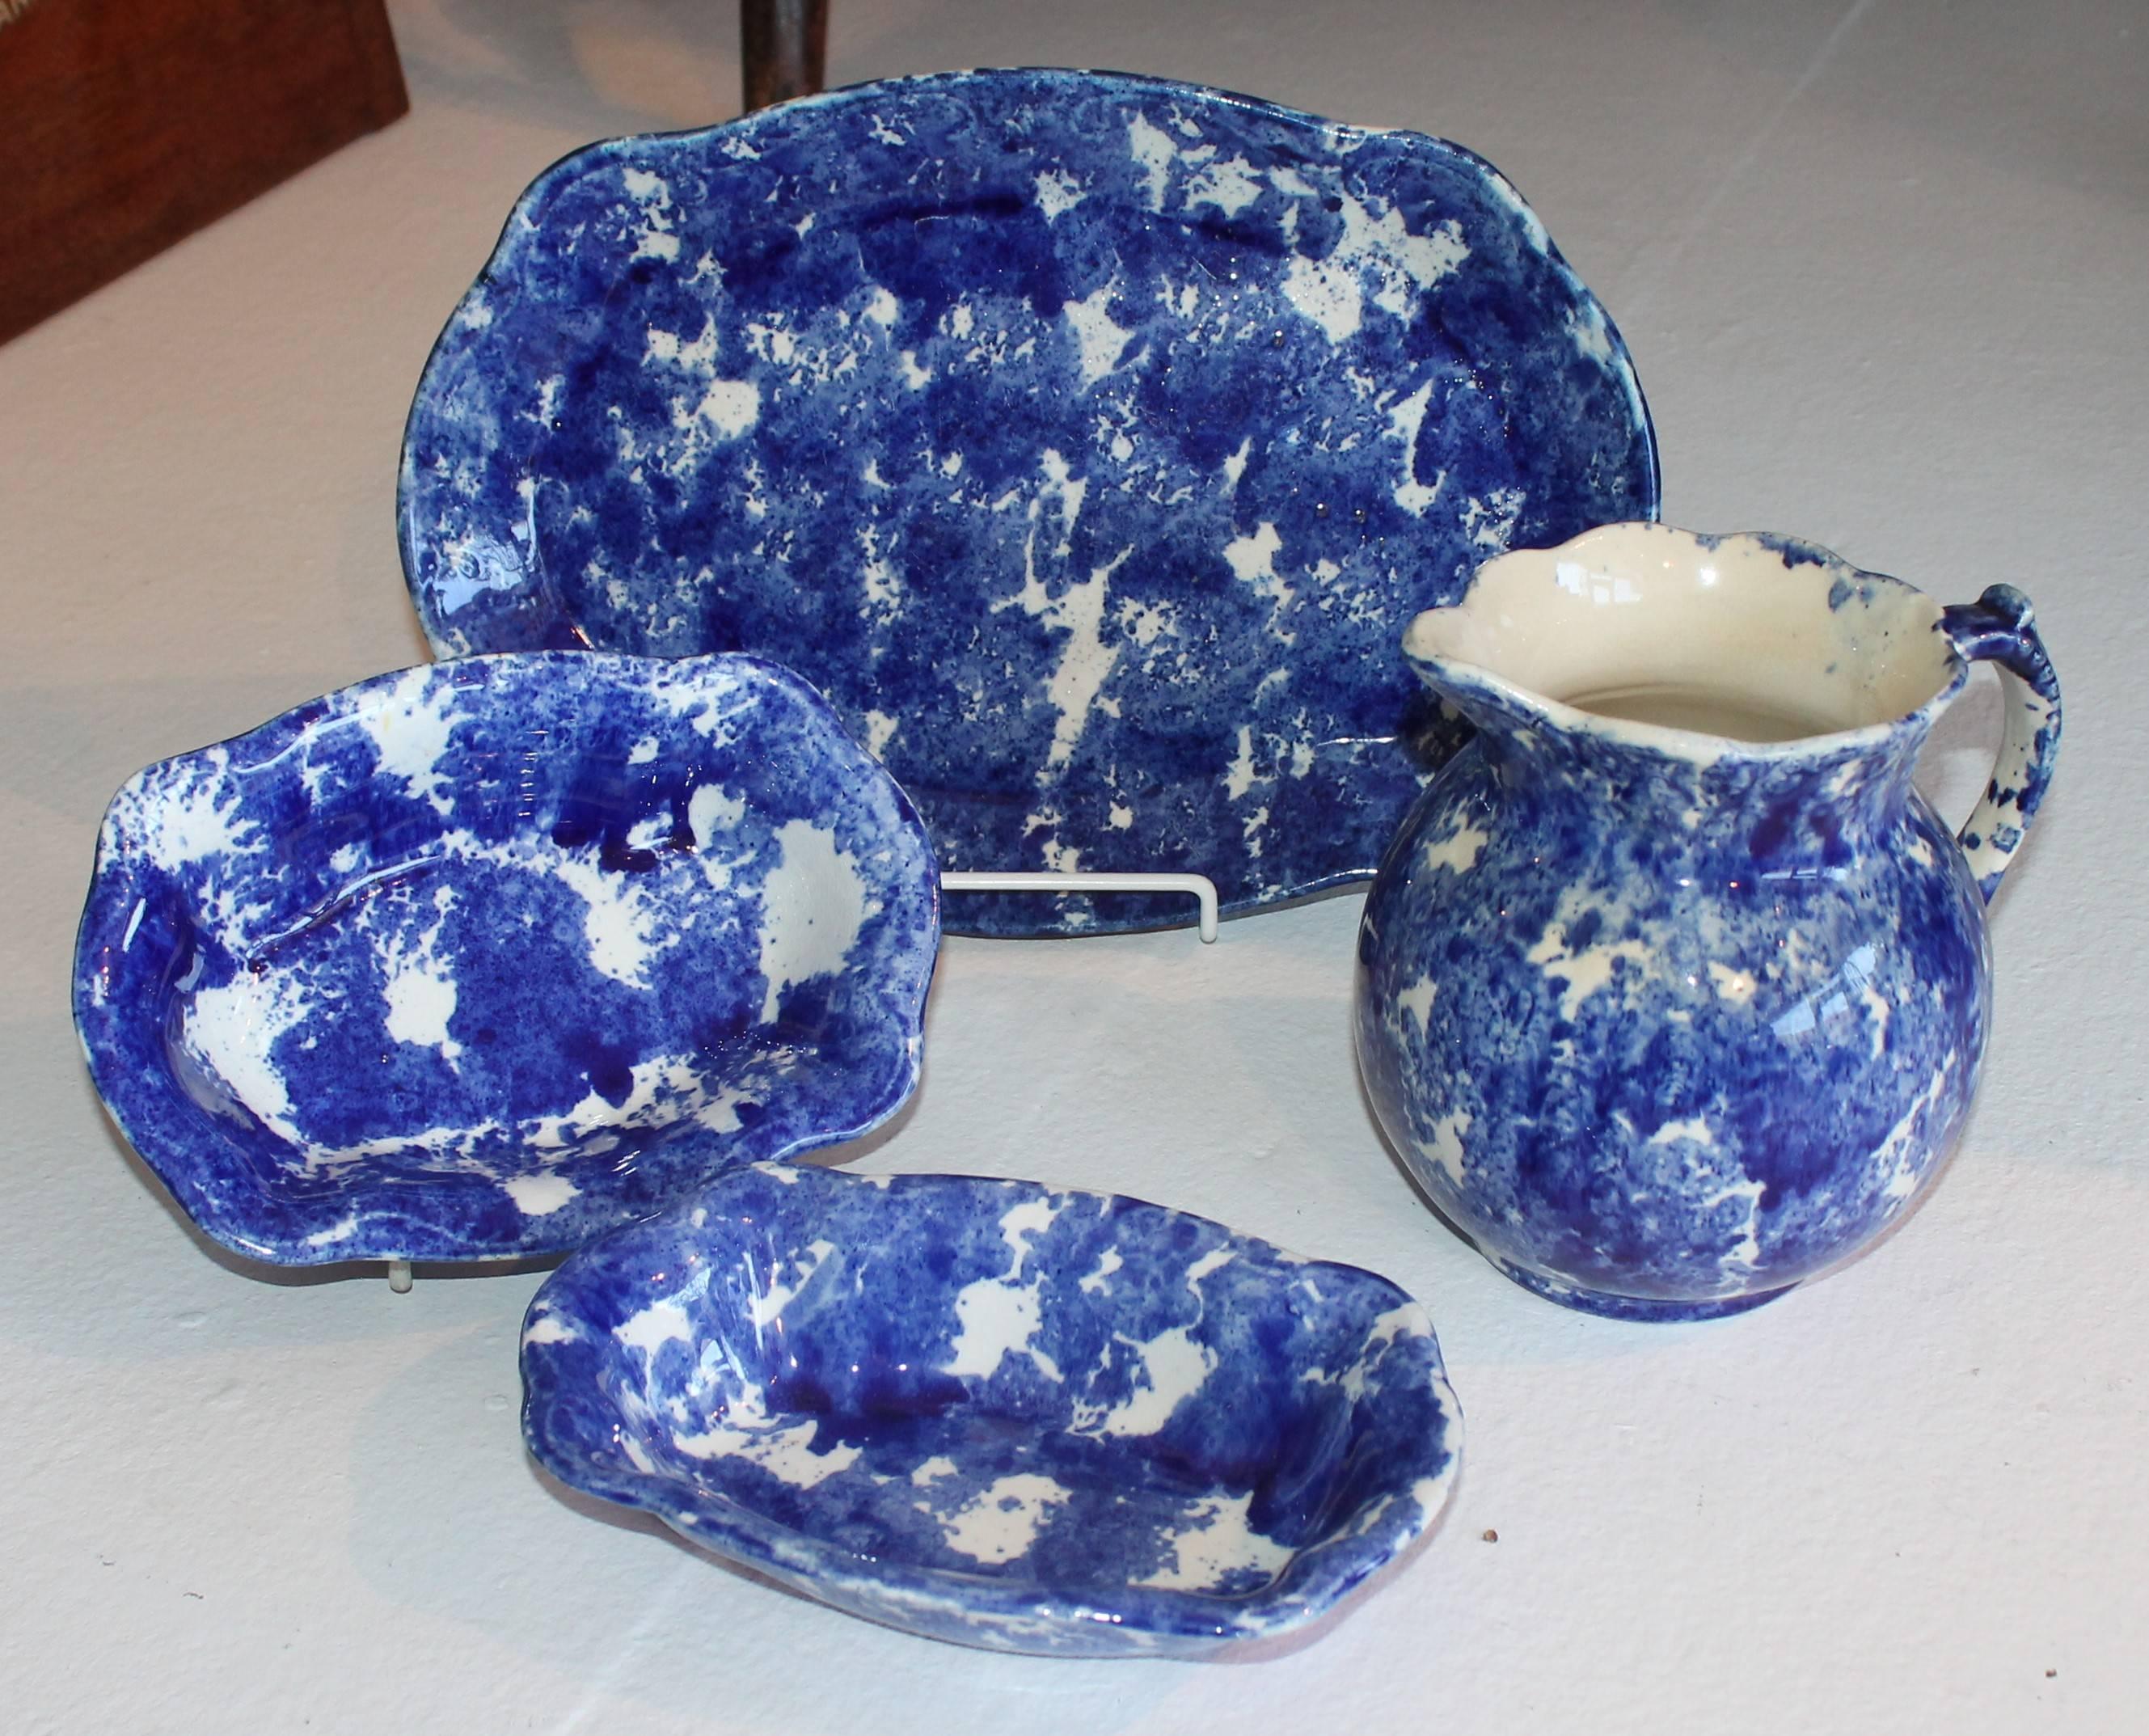 This beautiful 19th century set of sponge ware is in pristine condition. This set include one large platter, two vegetable bowls and one pitcher. Each item was inspected and show little to no signs of wear. This beautiful set of sponge ware is